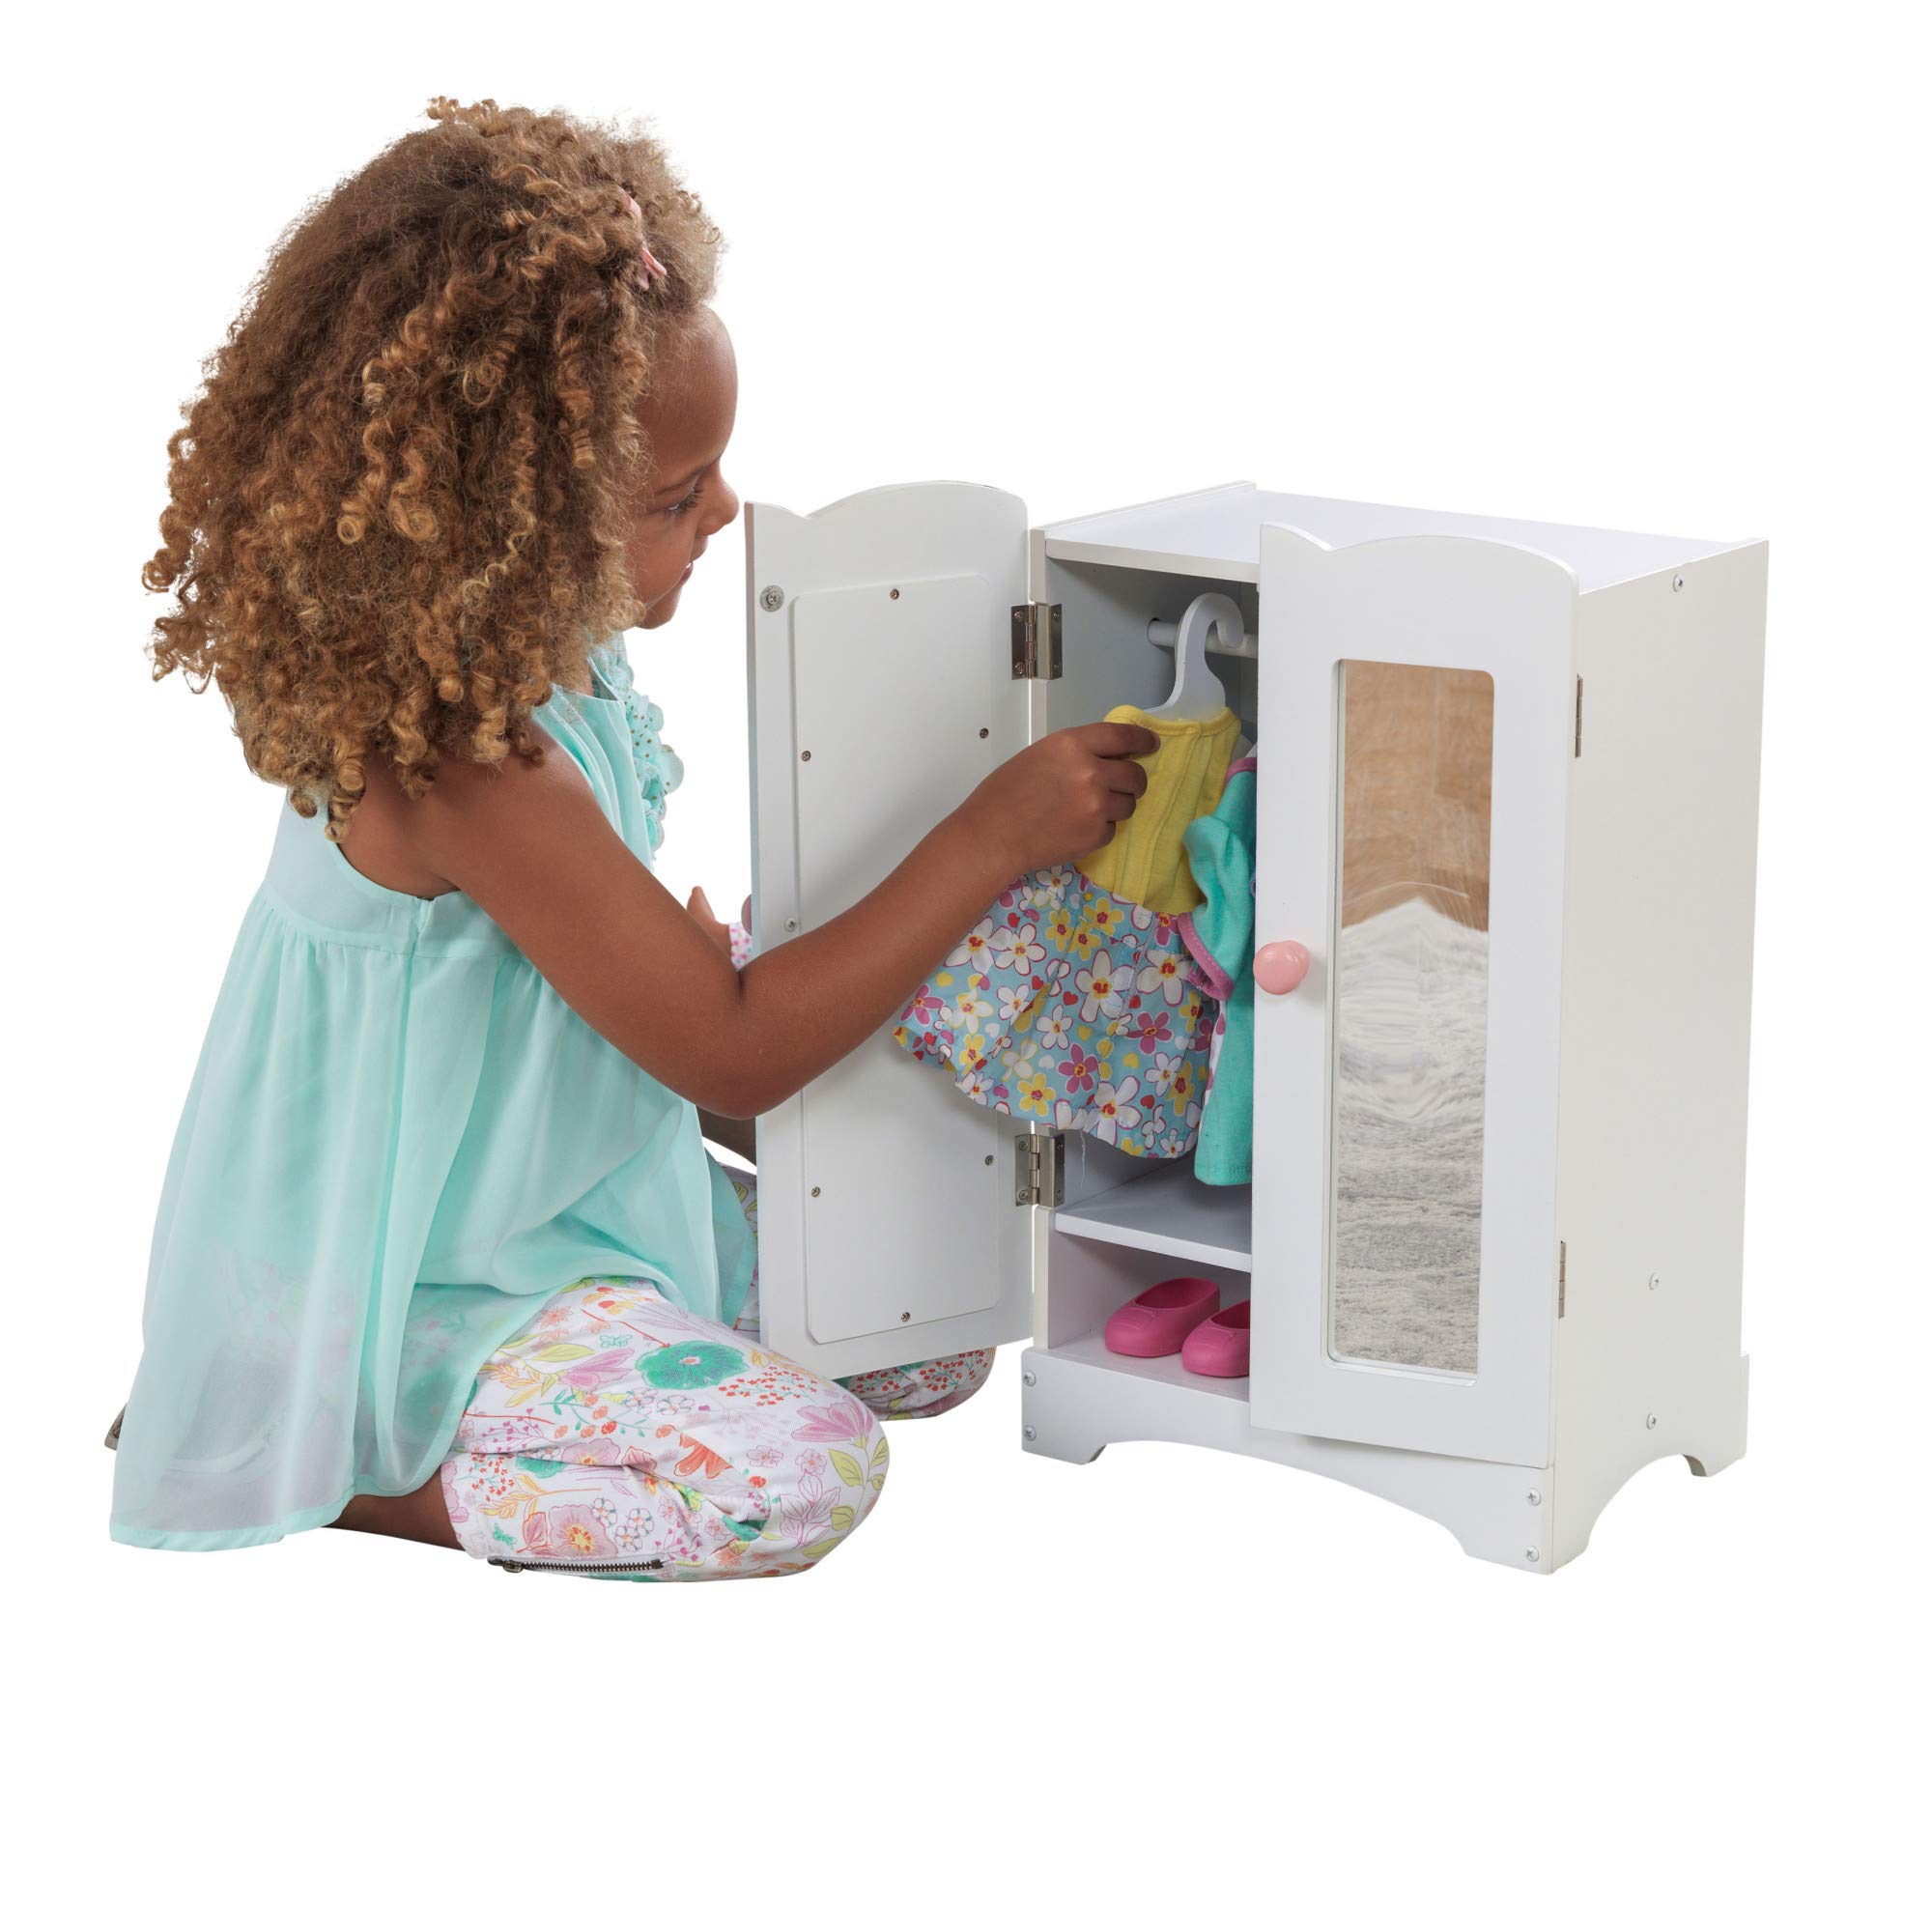 KidKraft Wooden Lil' Doll Armoire with 6 Hangers, Furniture for 18-Inch Dolls - White, Gift for Ages 3+